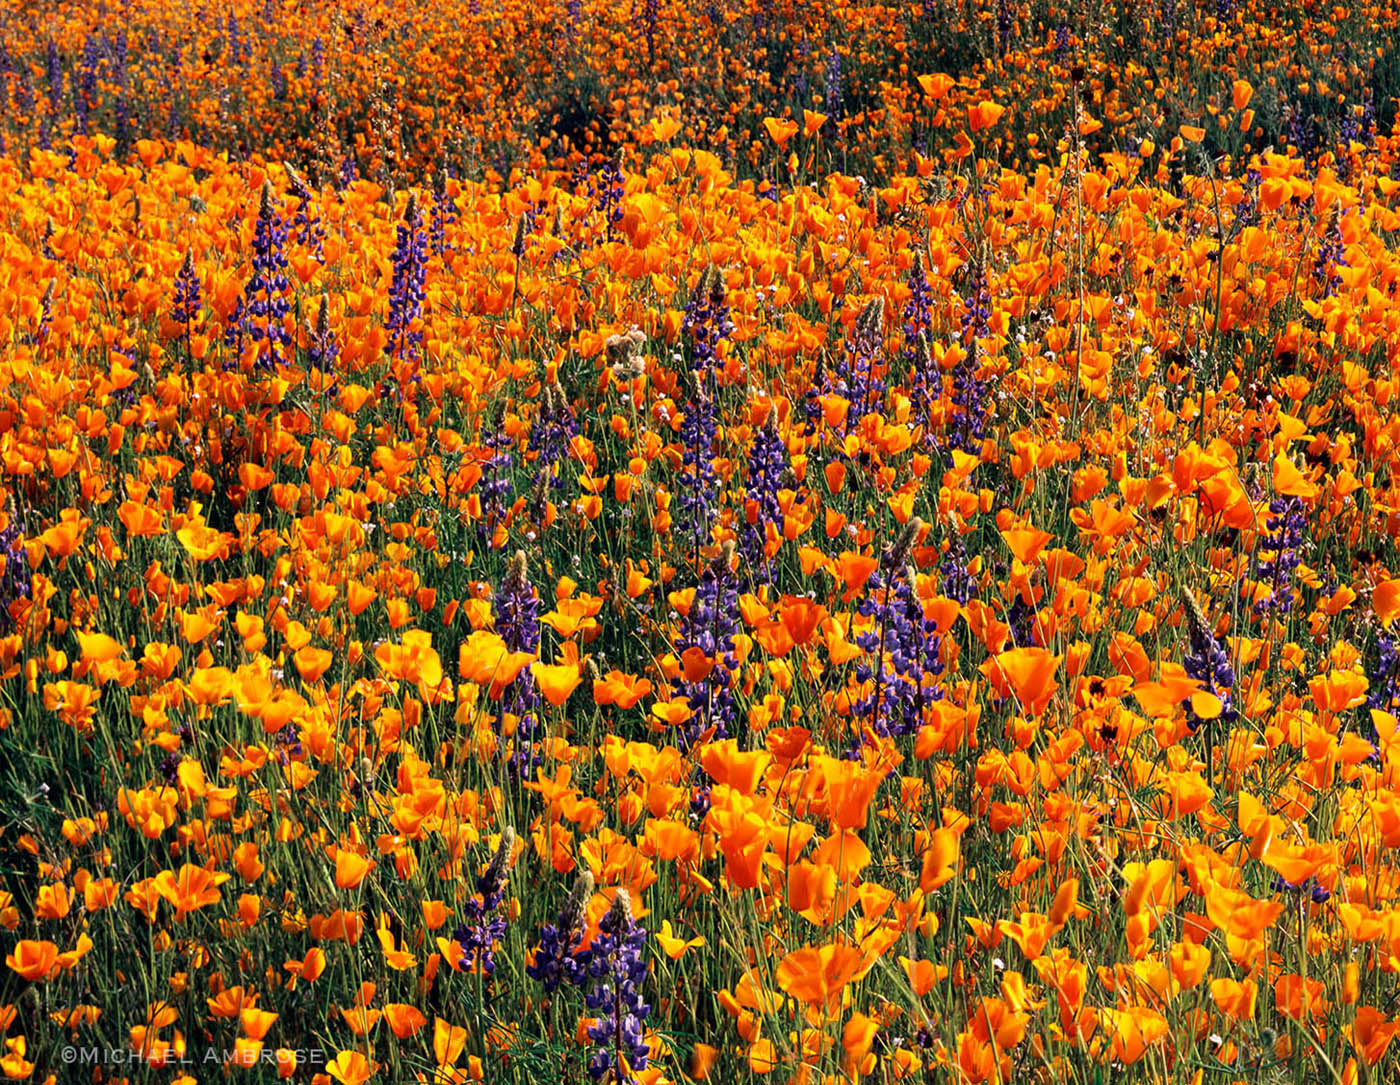 Golden poppies and purple lupine carpet the landscape in Three Rivers, California during Spring.